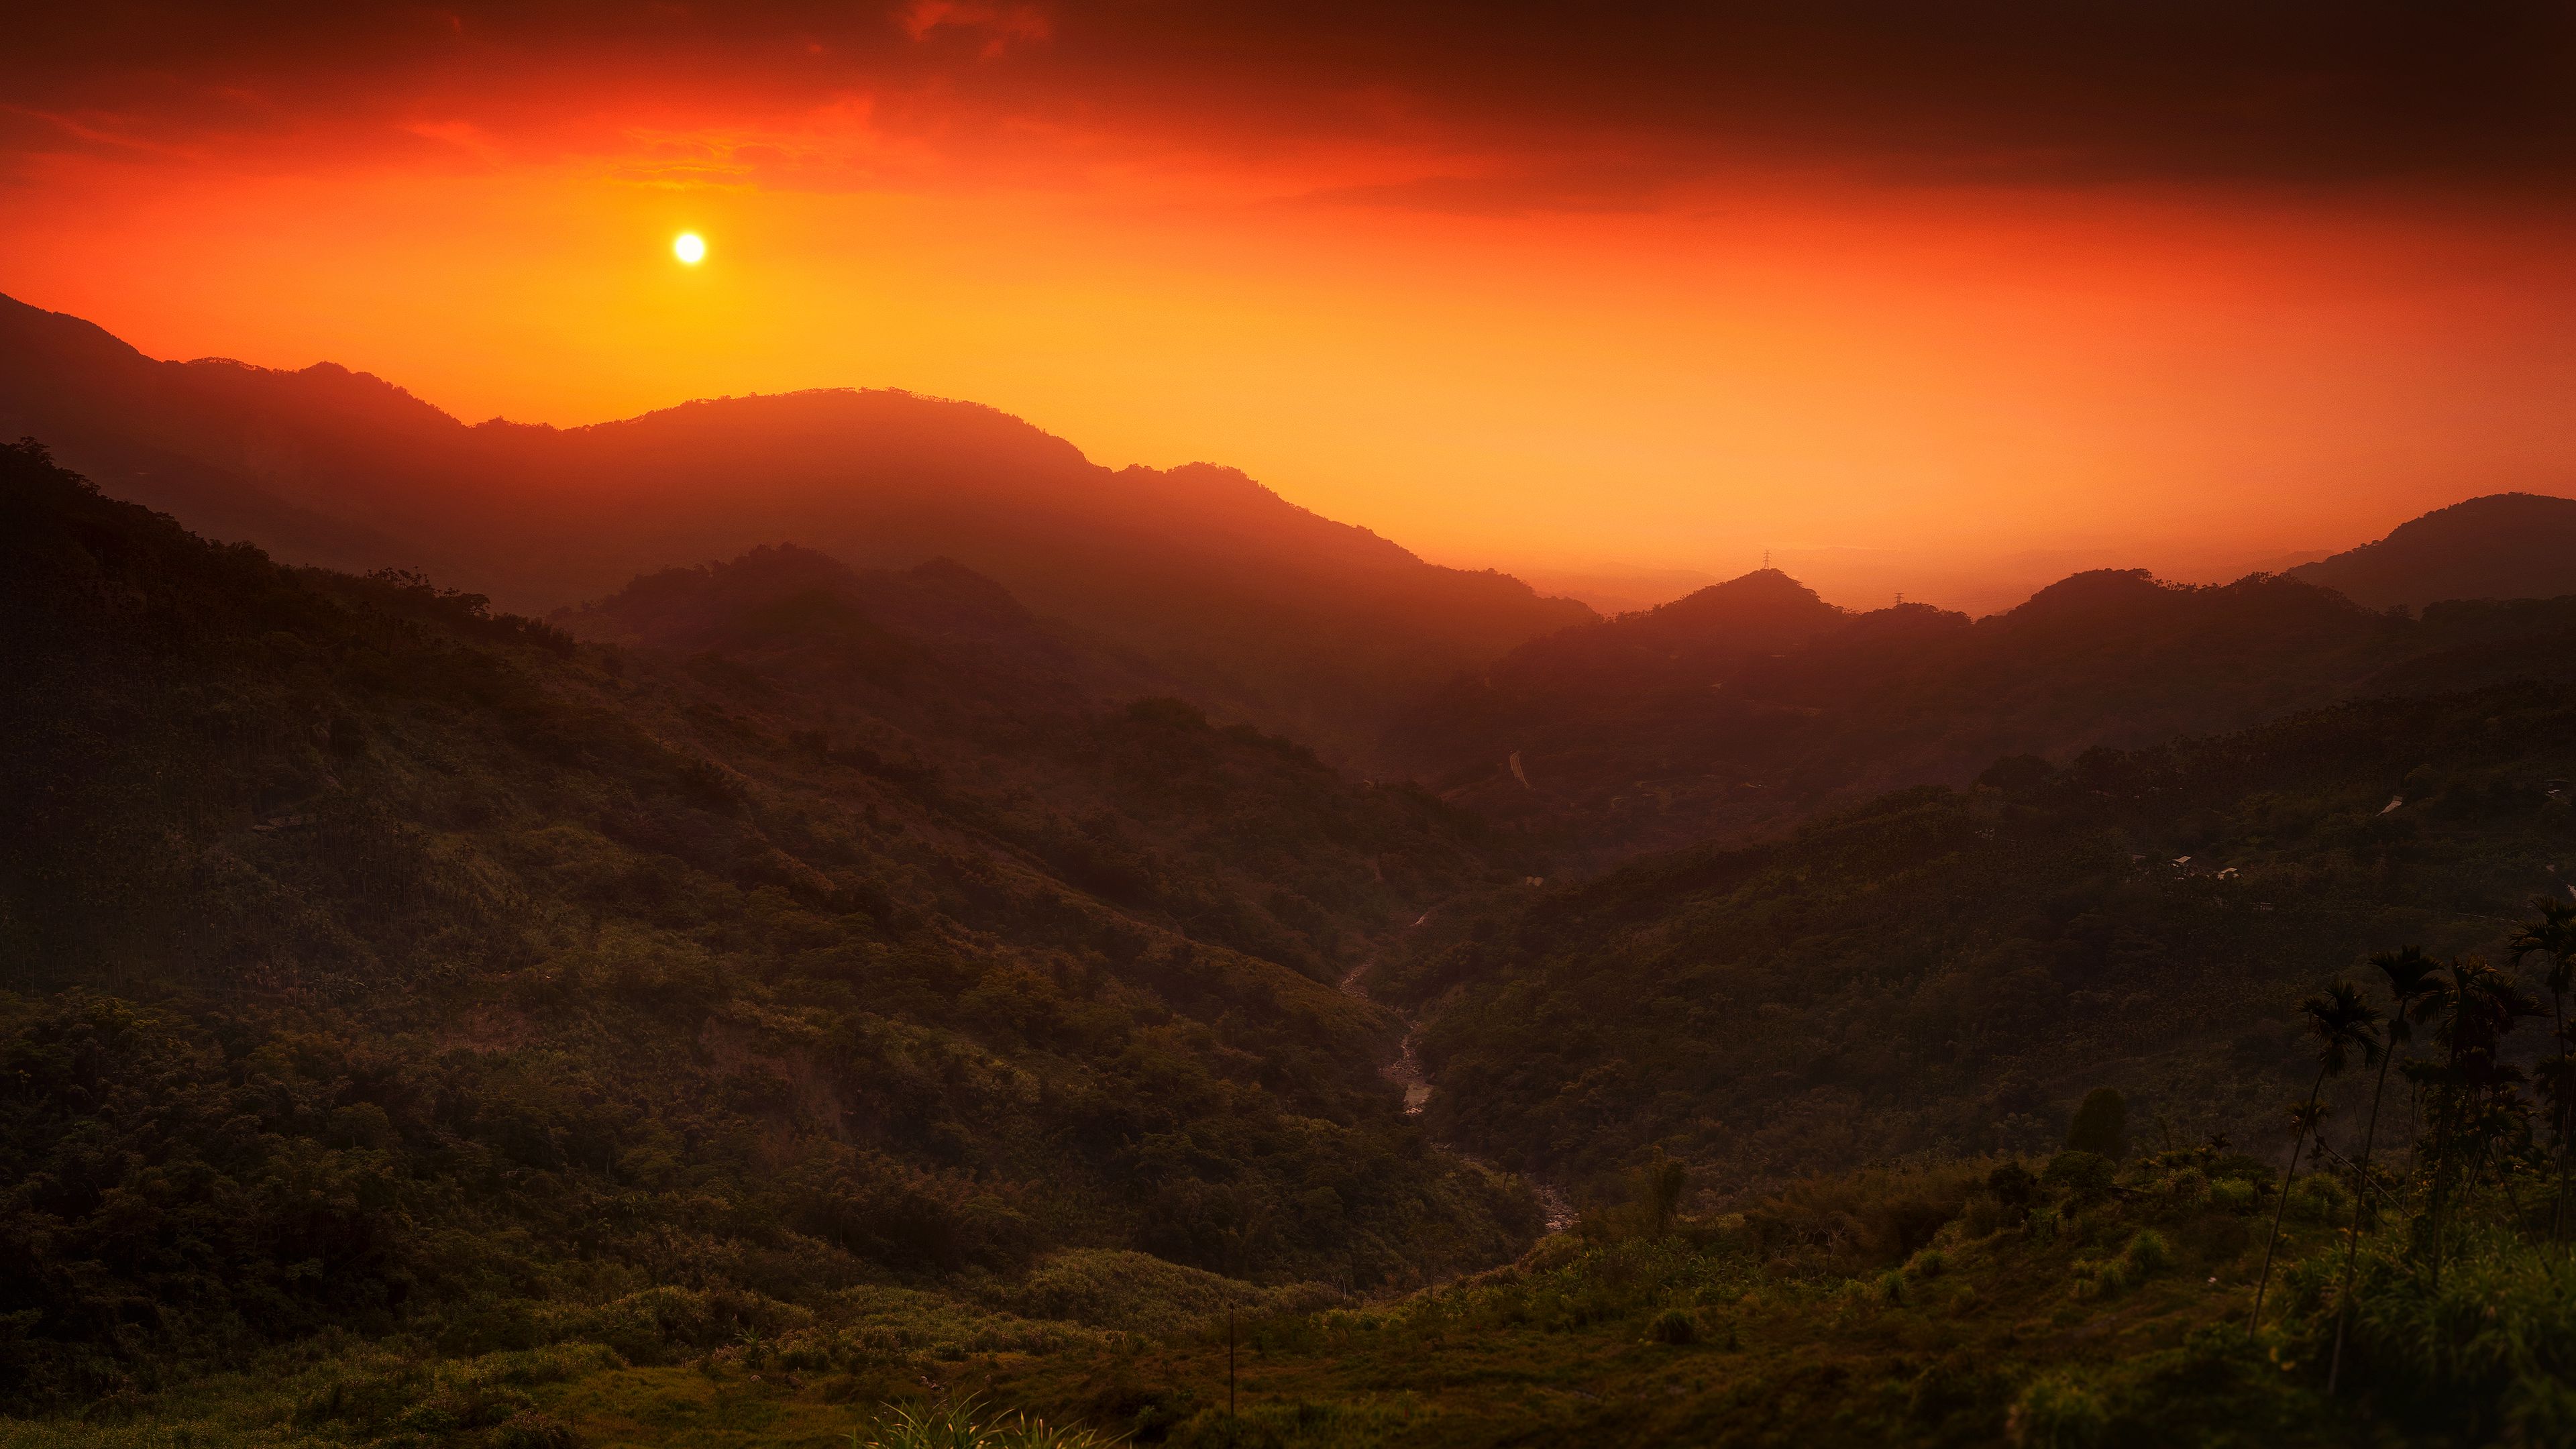 A sunset over a valley HD wallpaper 4k background